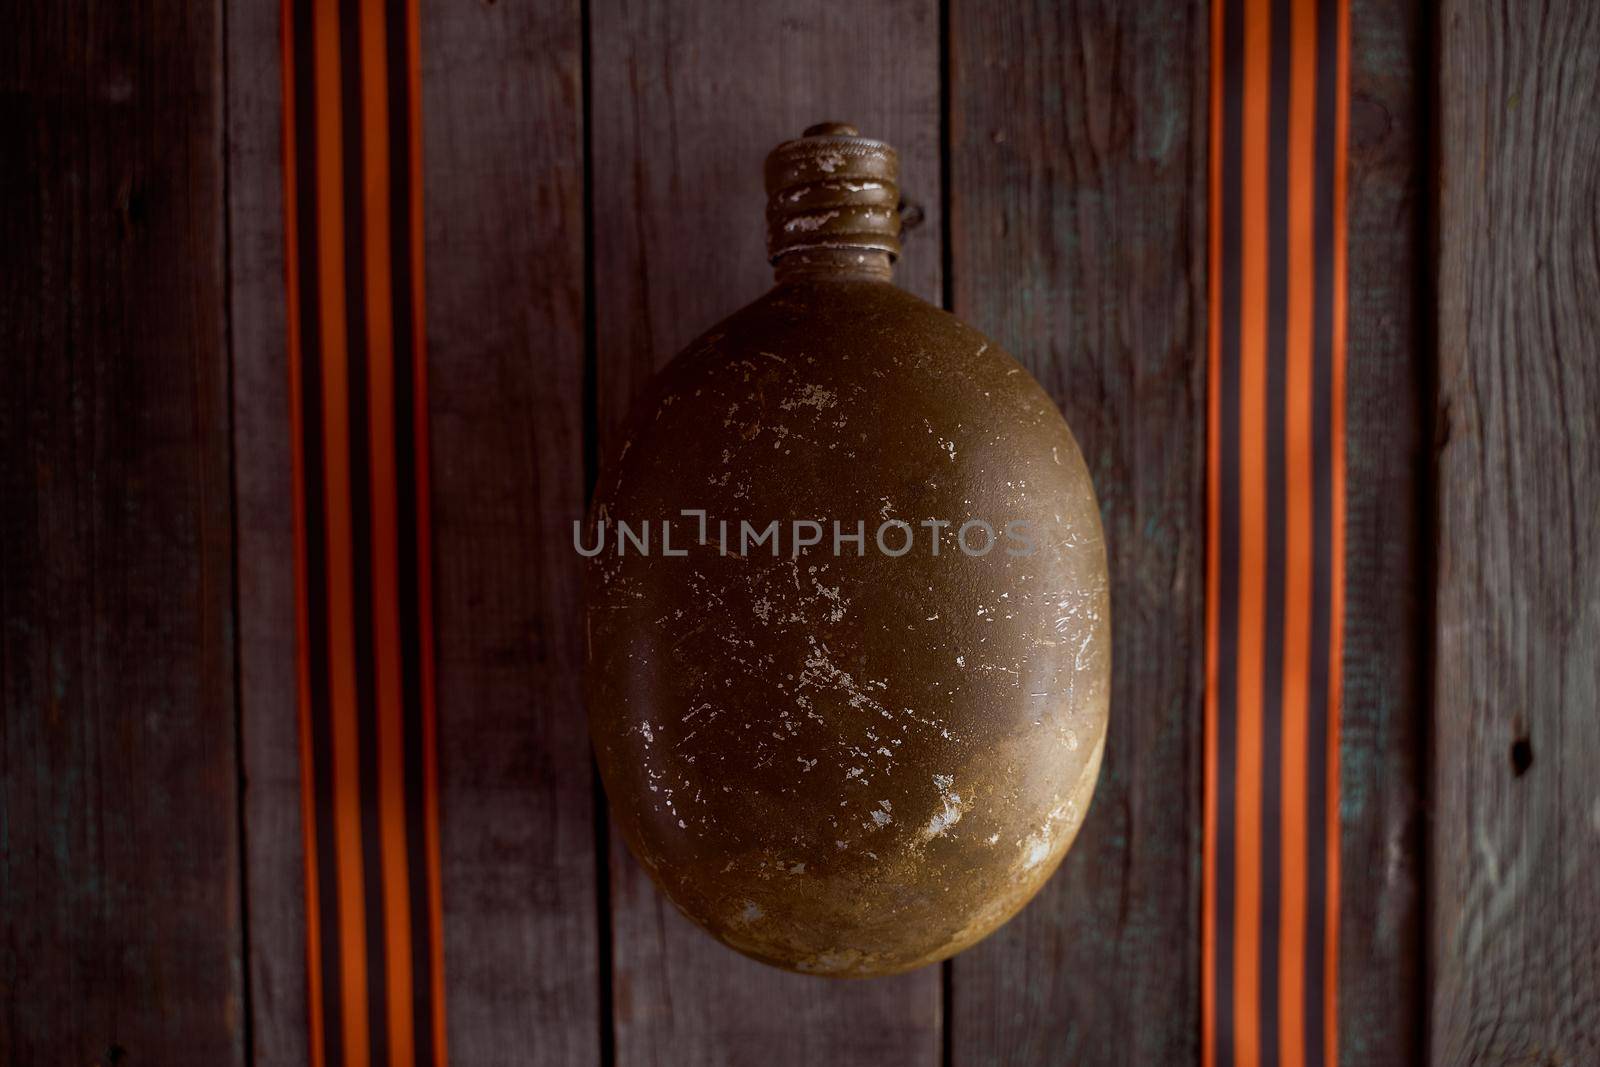 The soldier's flask lies between St. George's ribbons on a wooden table. High quality photo